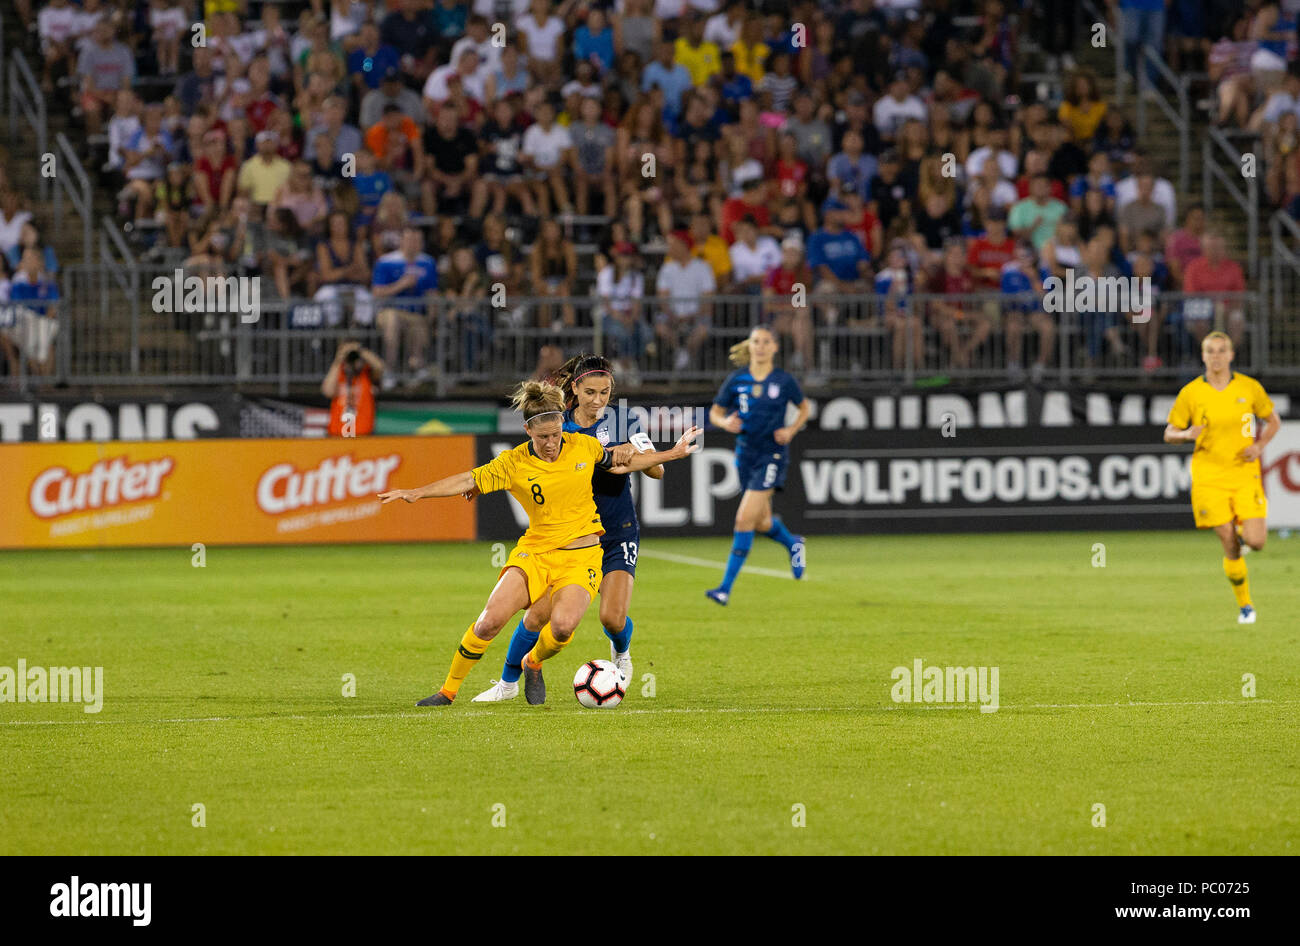 East Hartford, United States. 29th July, 2018. Alex Morgan (13) of USA and Elise Kellond-Knight (8) of Australia fight for ball during Tournament of Nations game at Pratt & Whitney stadium Game ended in draw 1 - 1 Credit: Lev Radin/Pacific Press/Alamy Live News Stock Photo